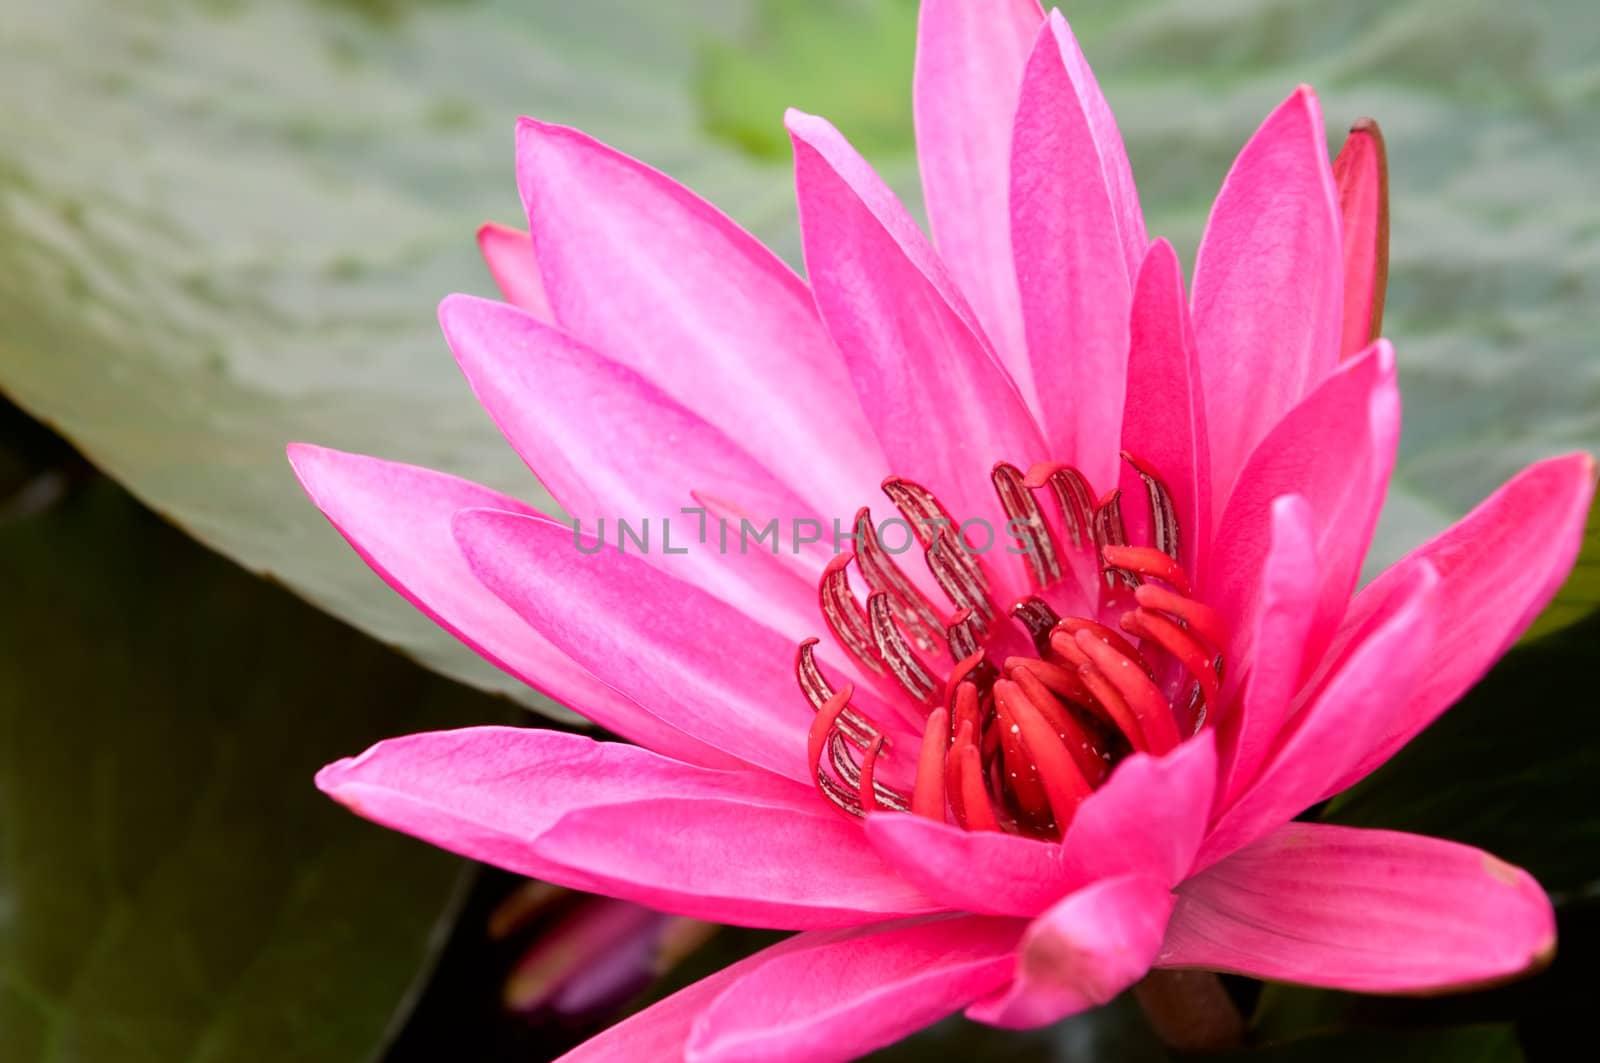 The close up (detail) of pink water lily